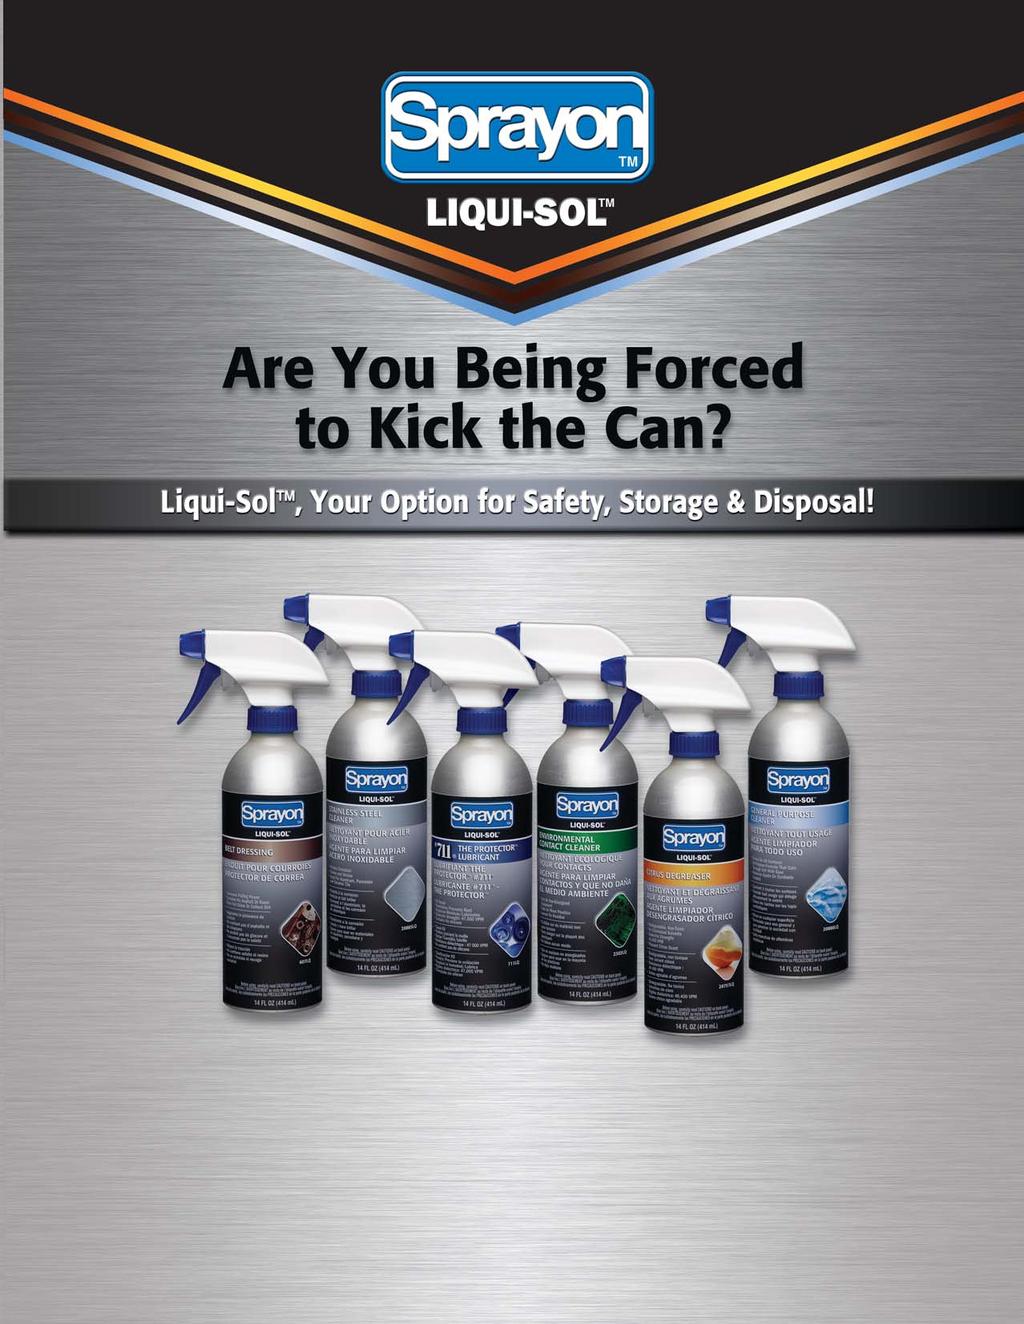 Sprayon Liqui-Sol is your option for safety, storage and disposal.